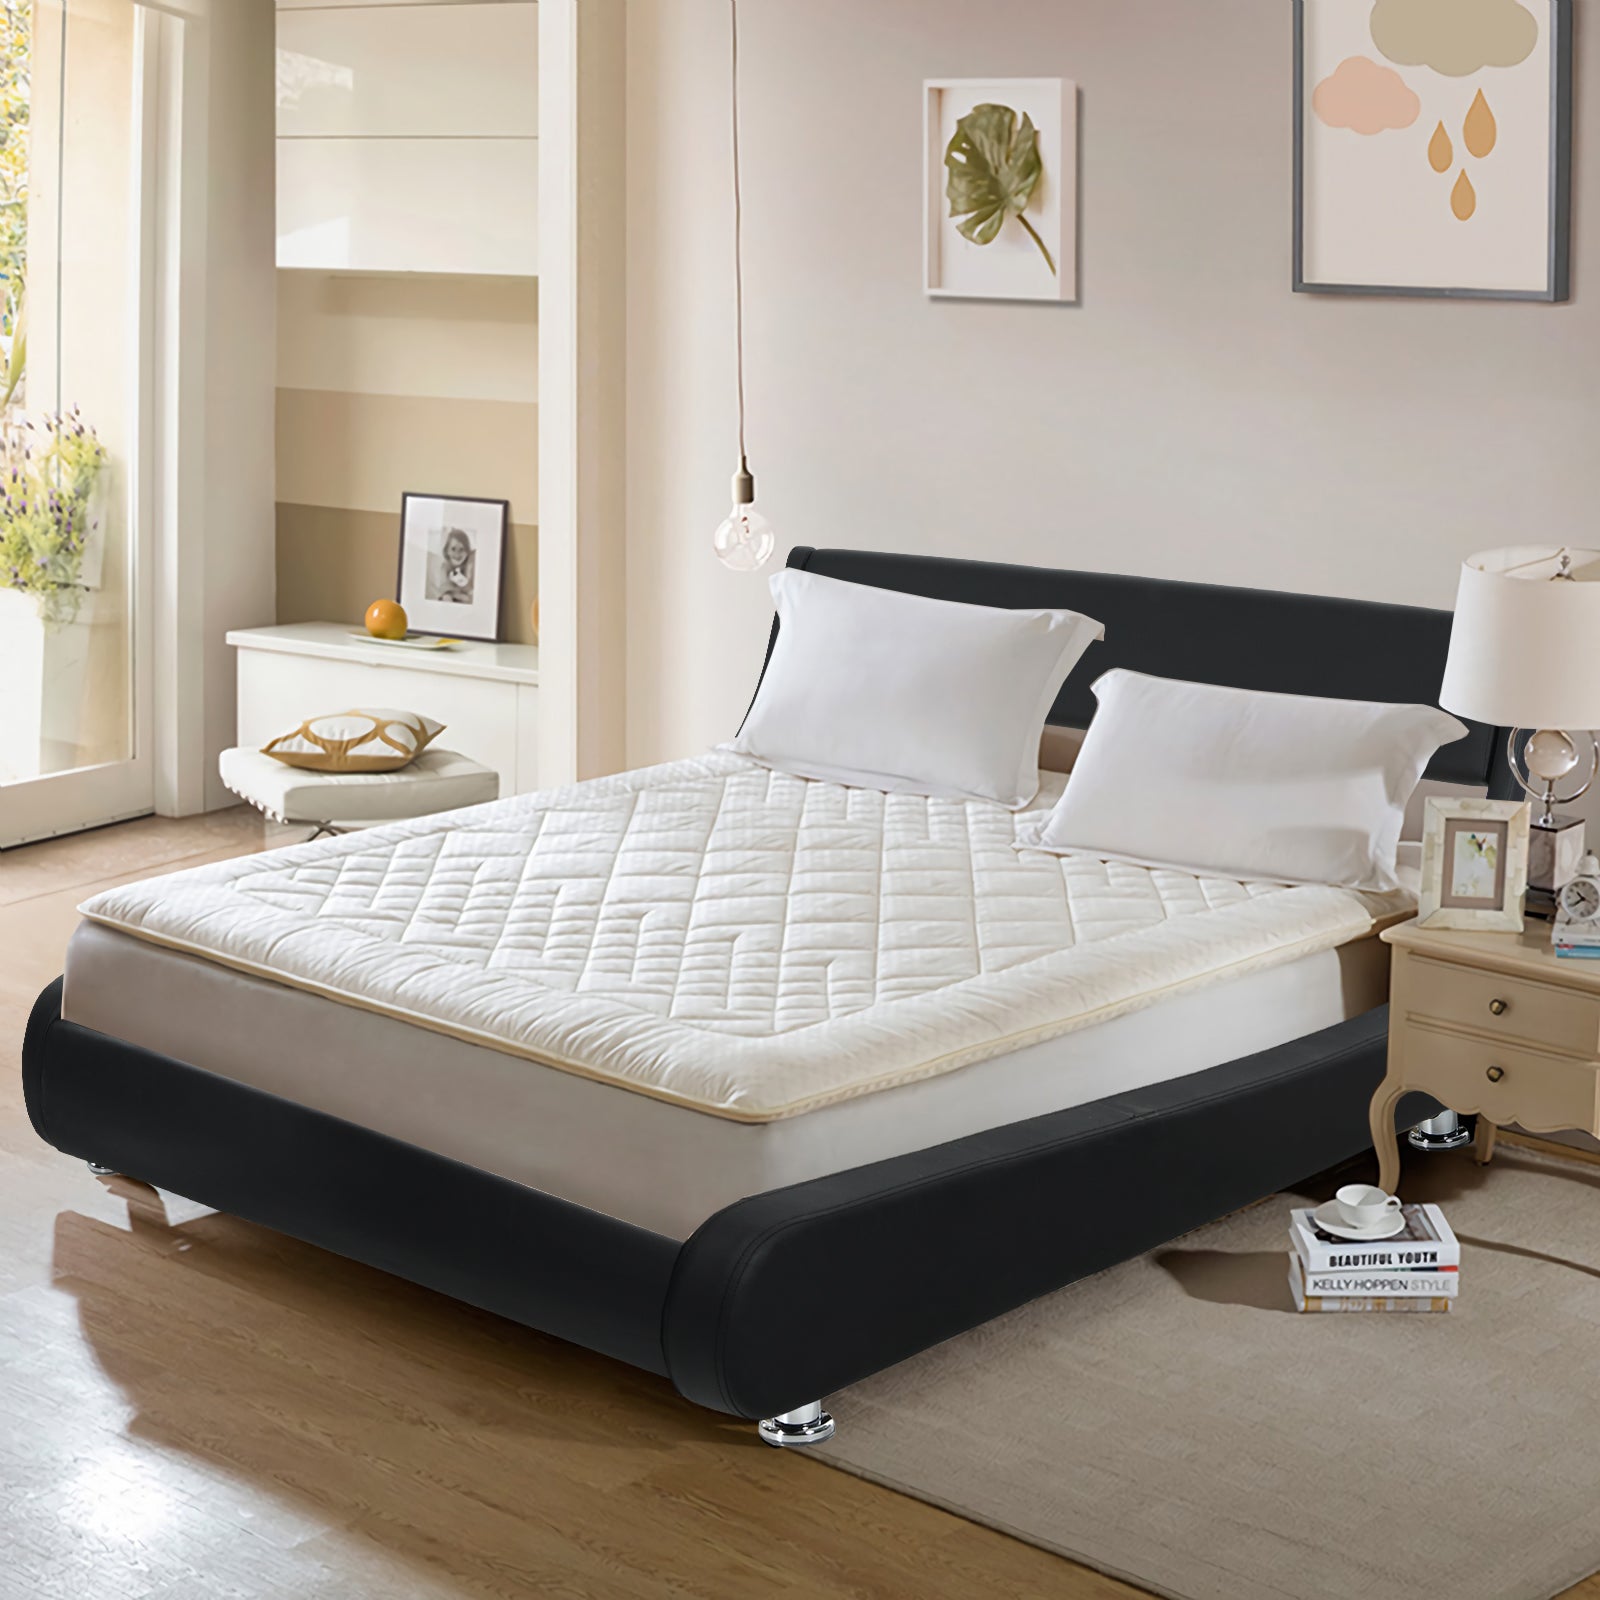 Giantex Bed Frame, Upholstered Mattress Foundation with Adjustable Headboard (Full/Queen)